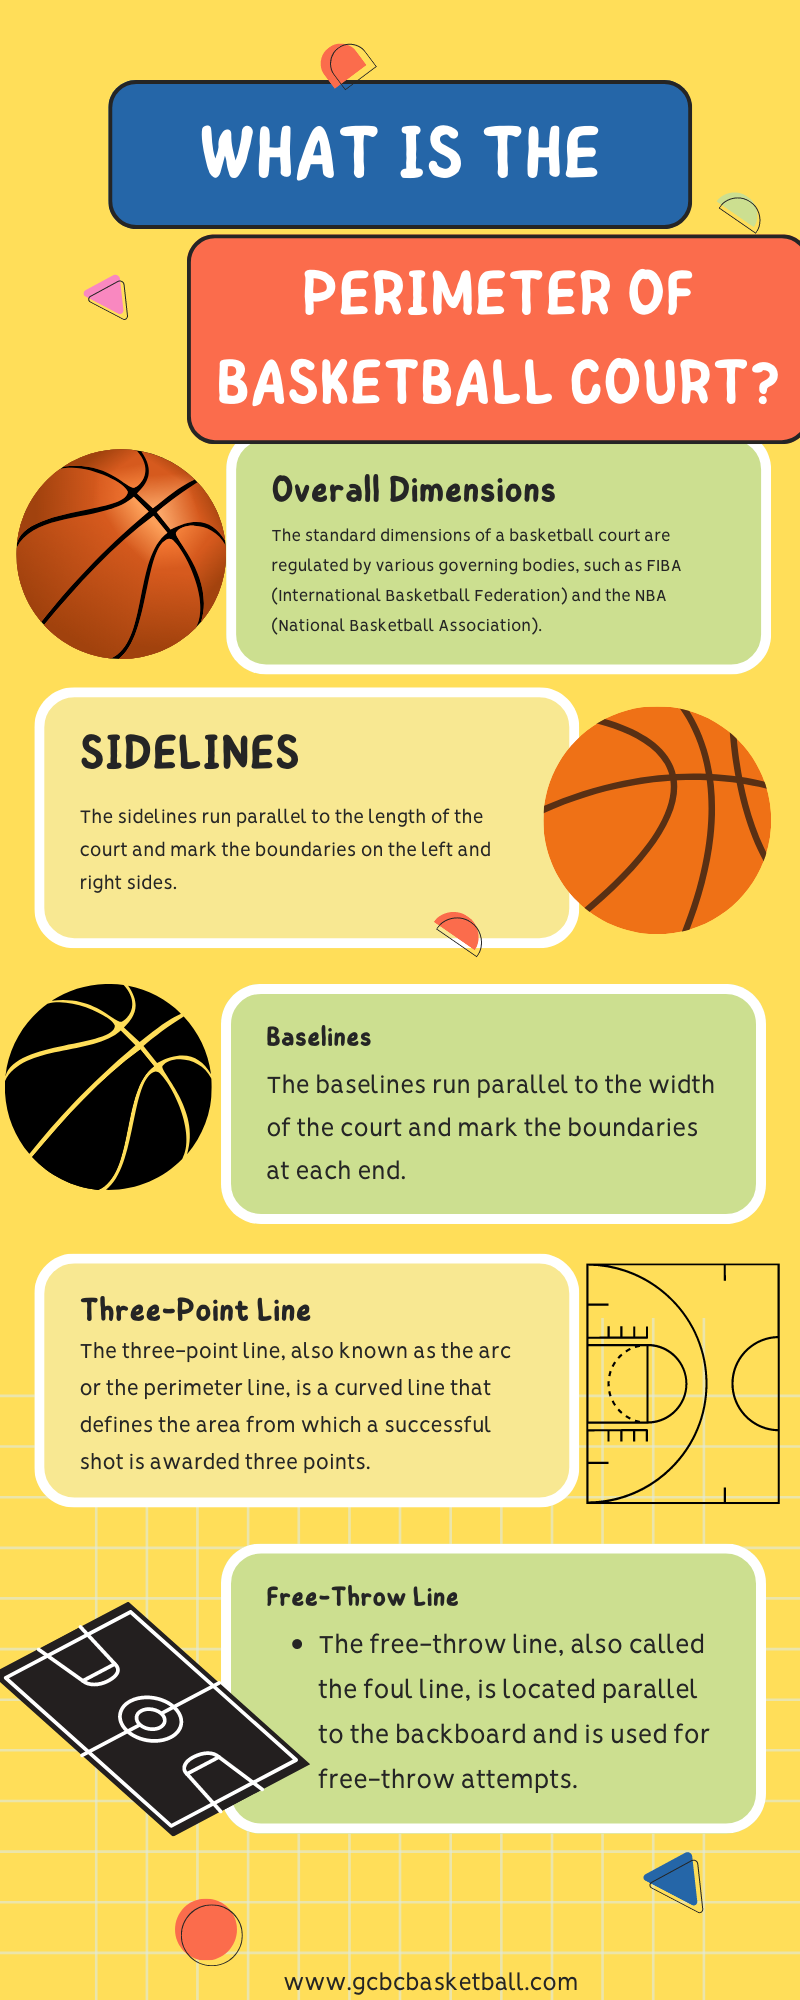 What Is The Perimeter Of A Basketball Court-Infographic